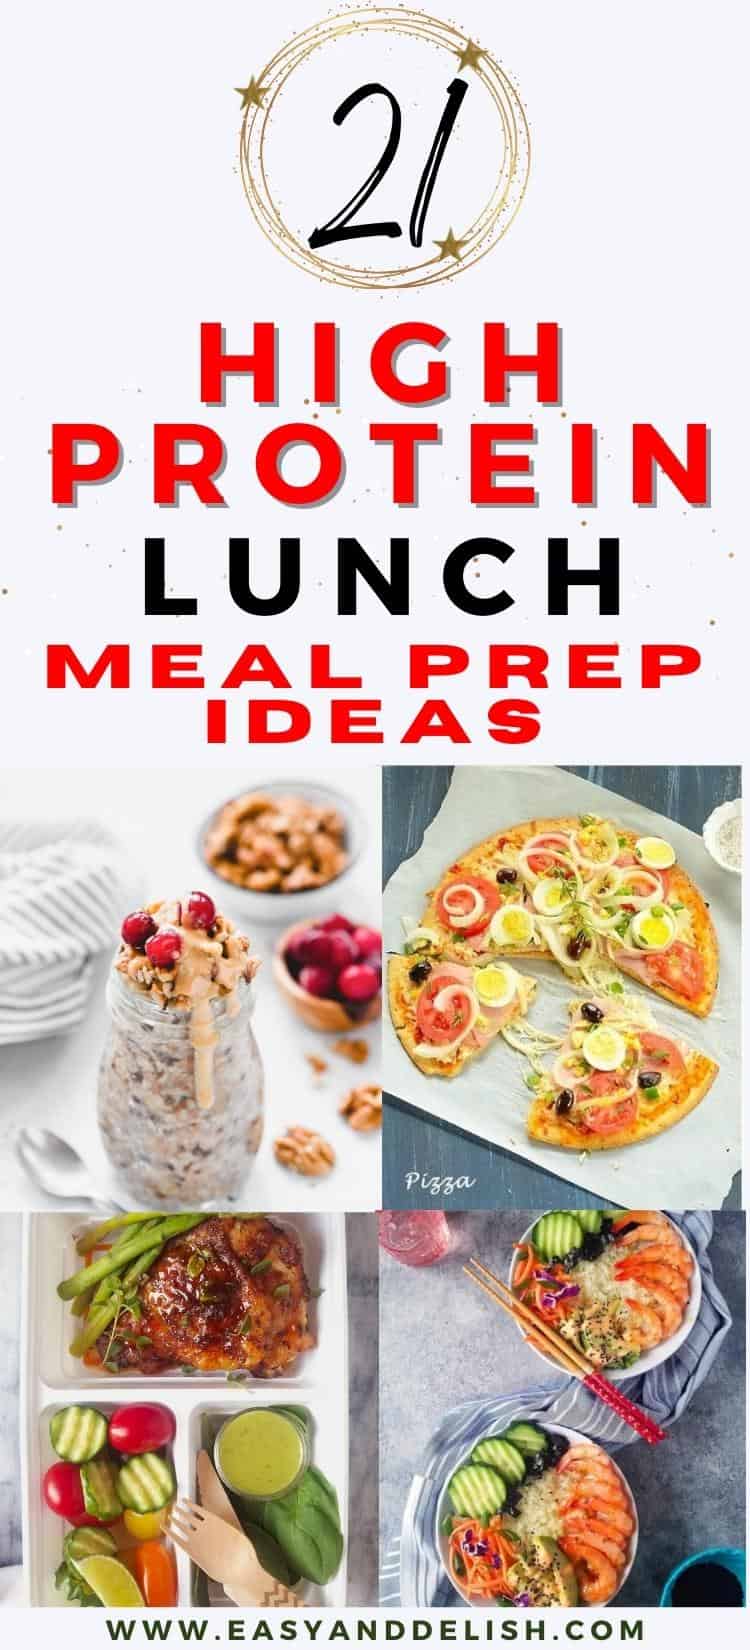 25 High-Protein Meal Prep Recipes - High-Protein Meal Ideas